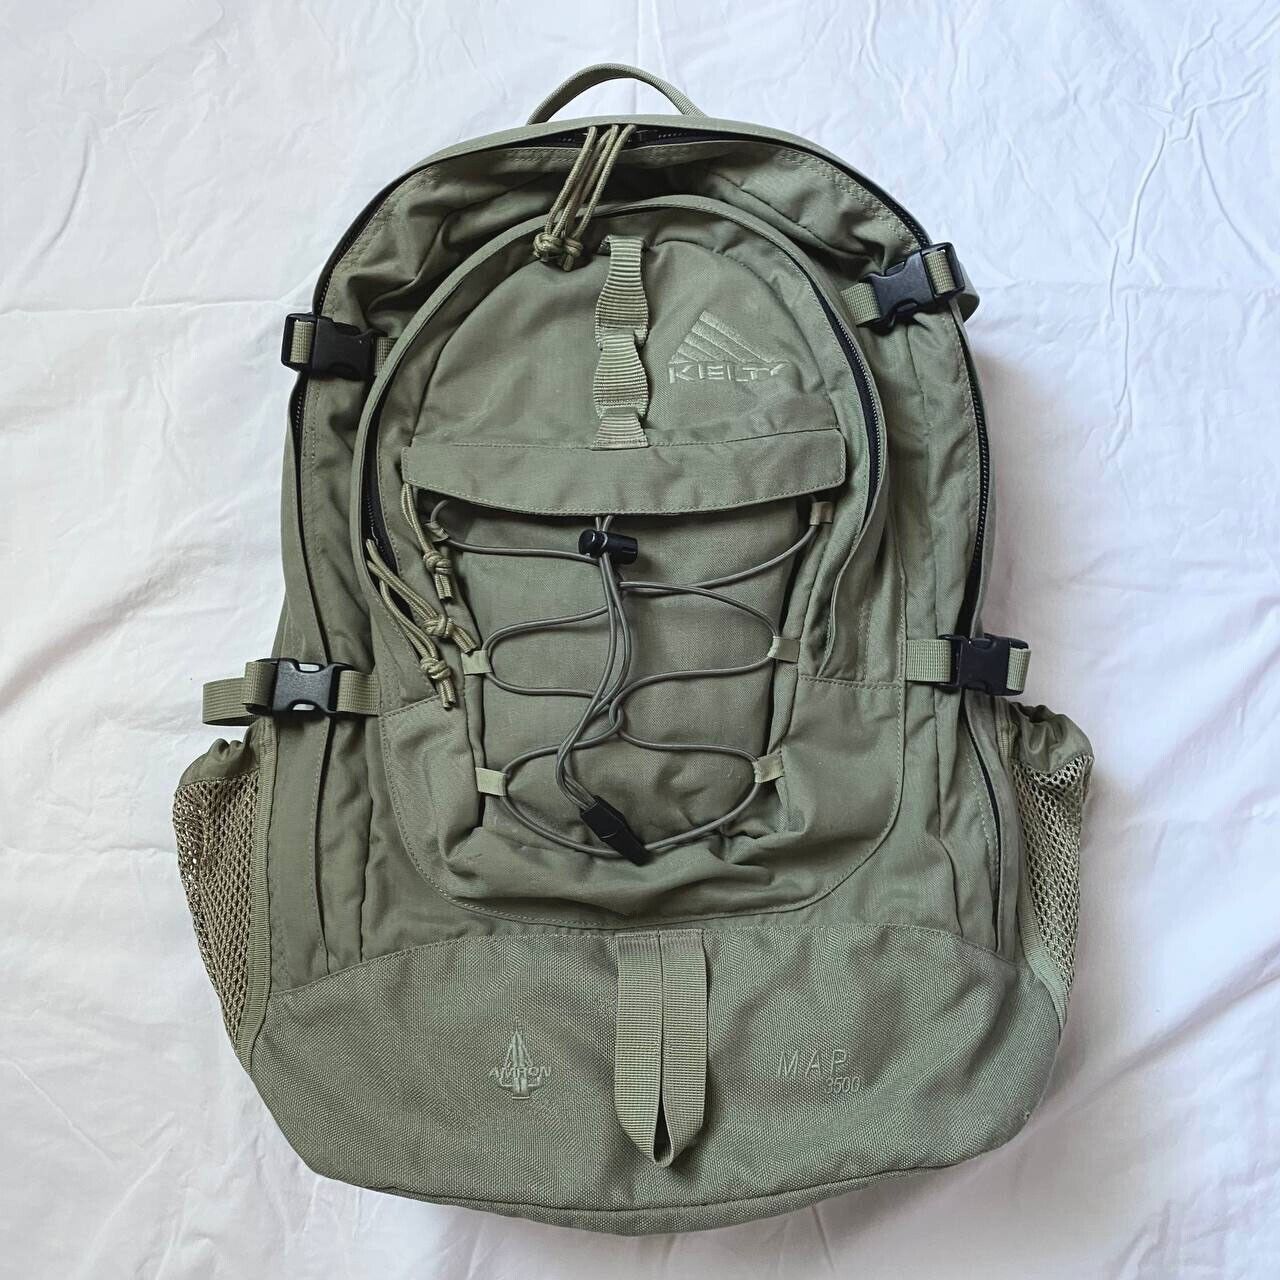 Kelty MAP 3500 AMRON 3 Day Assault Pack SEAL SOCOM Sage Green RARE Backpack 2010